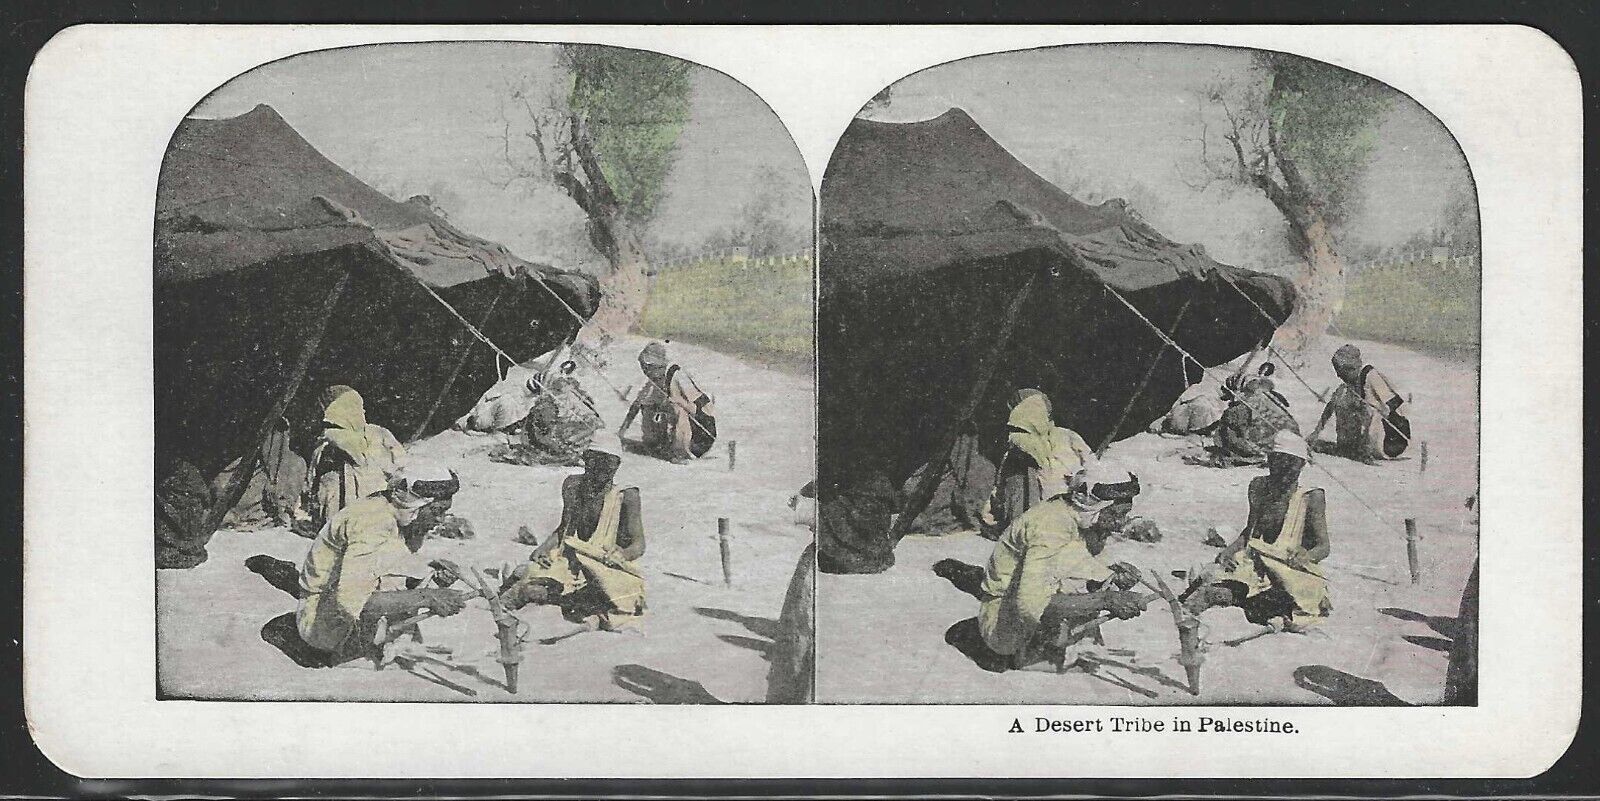 A Desert tribe in Palestine, Hand Colored Stereographic View Card